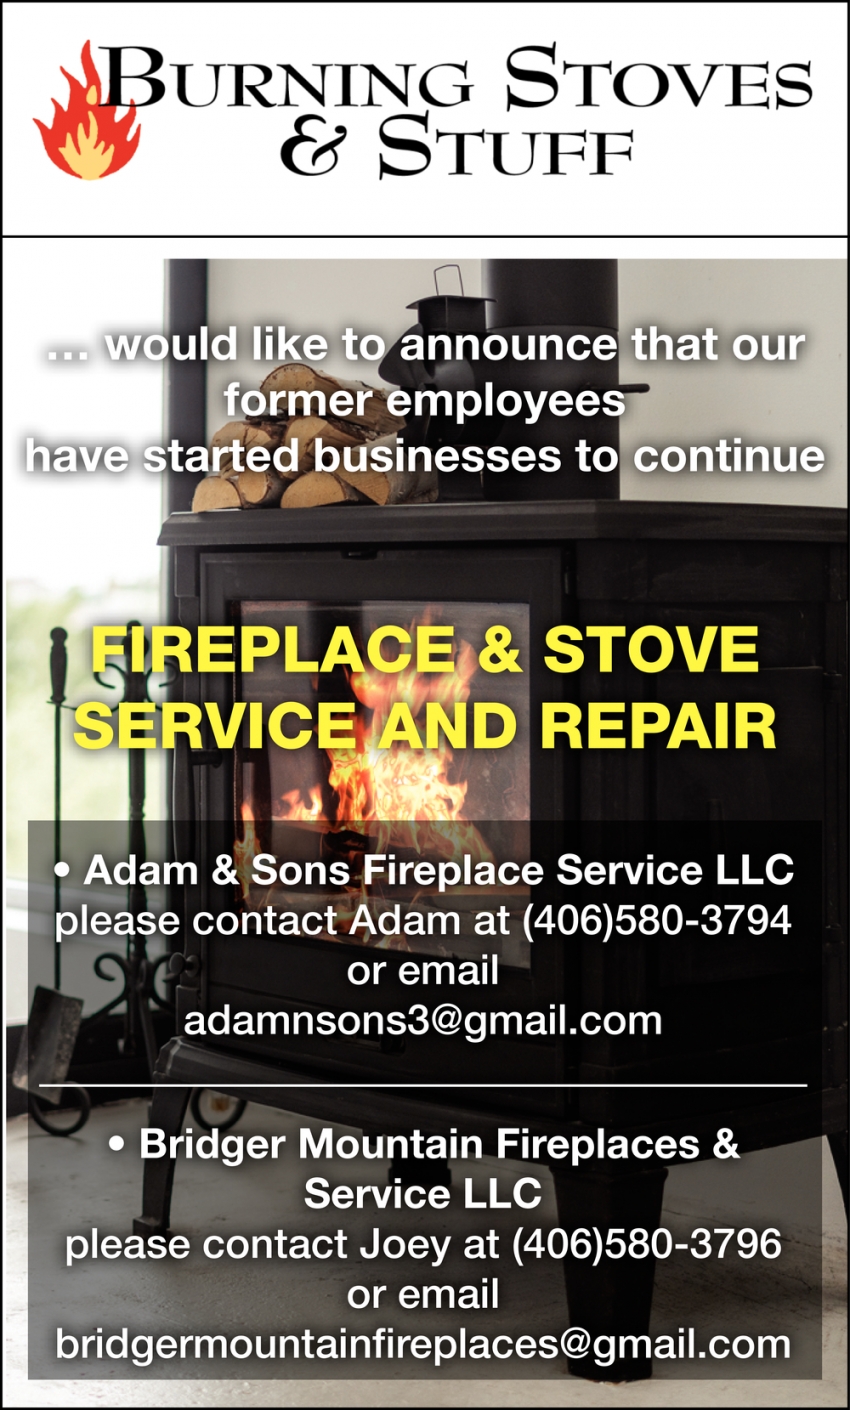 Fireplace & Stove Service and Repair